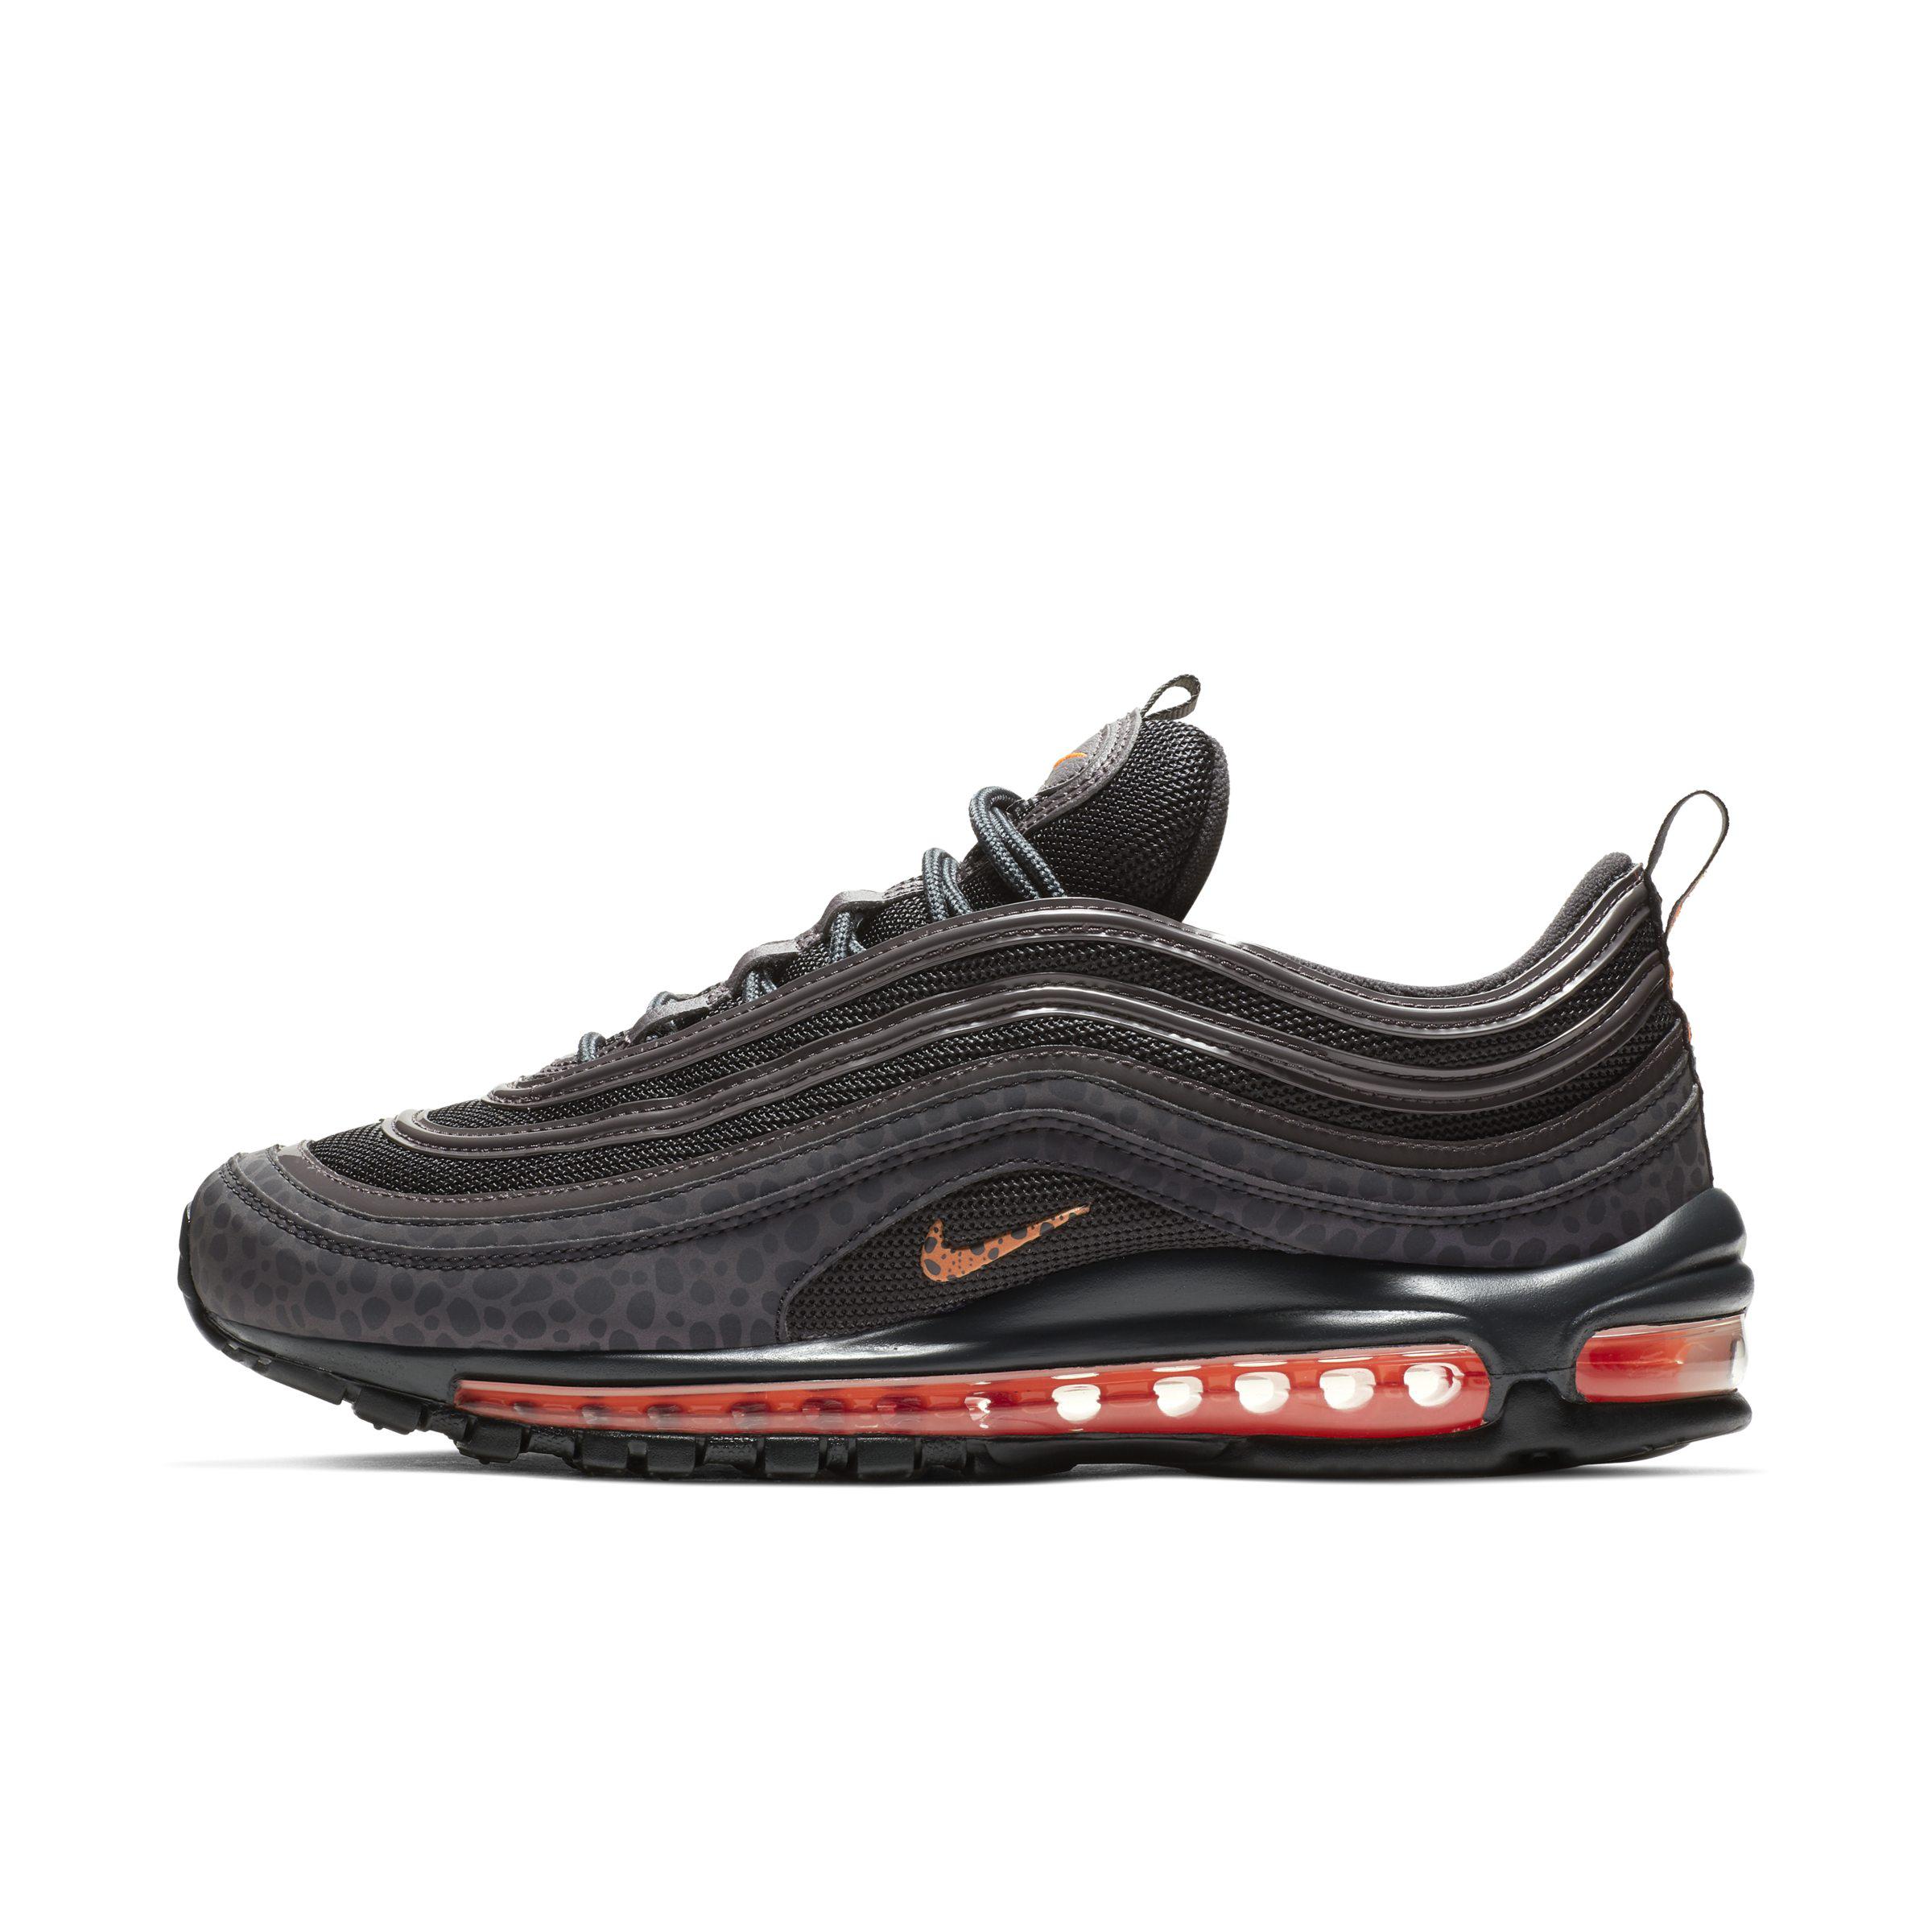 Nike Air Max 97 Se Reflective Shoes - Size 9 in Black for Men - Lyst